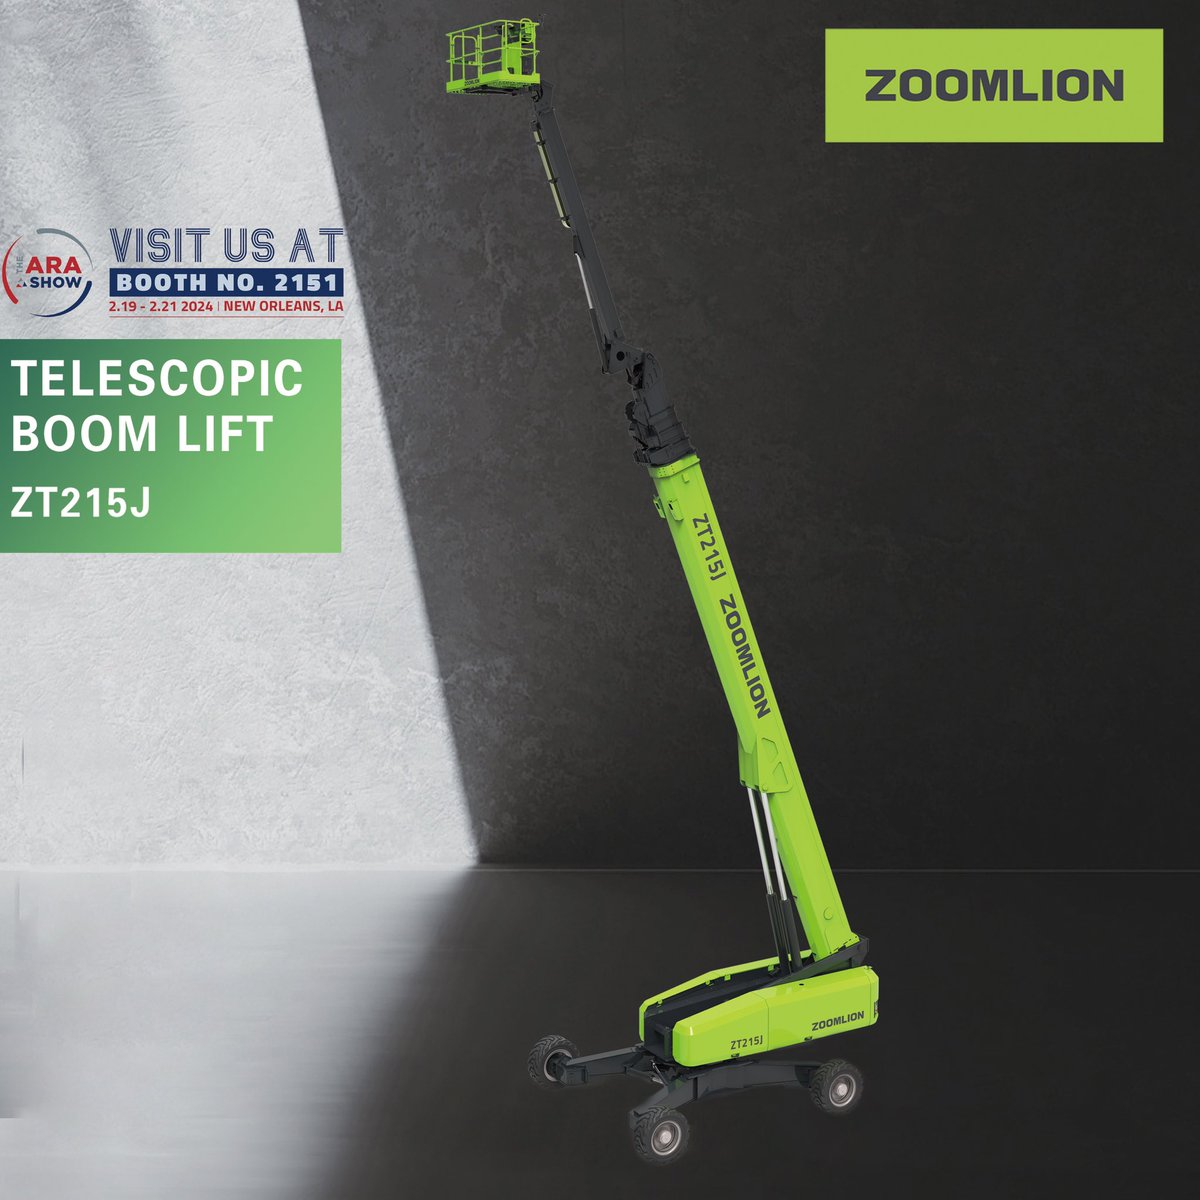 ⏰🚀 The grand unveiling is approaching! In just under a month, the #ARASHOW 2024 in New Orleans, LA, will witness our revolutionary telescopic boom lift at Booth 2151. 🏗️ #ZOOMLIONACCESS is ready to showcase avant-garde innovations that redefine reach and efficiency.